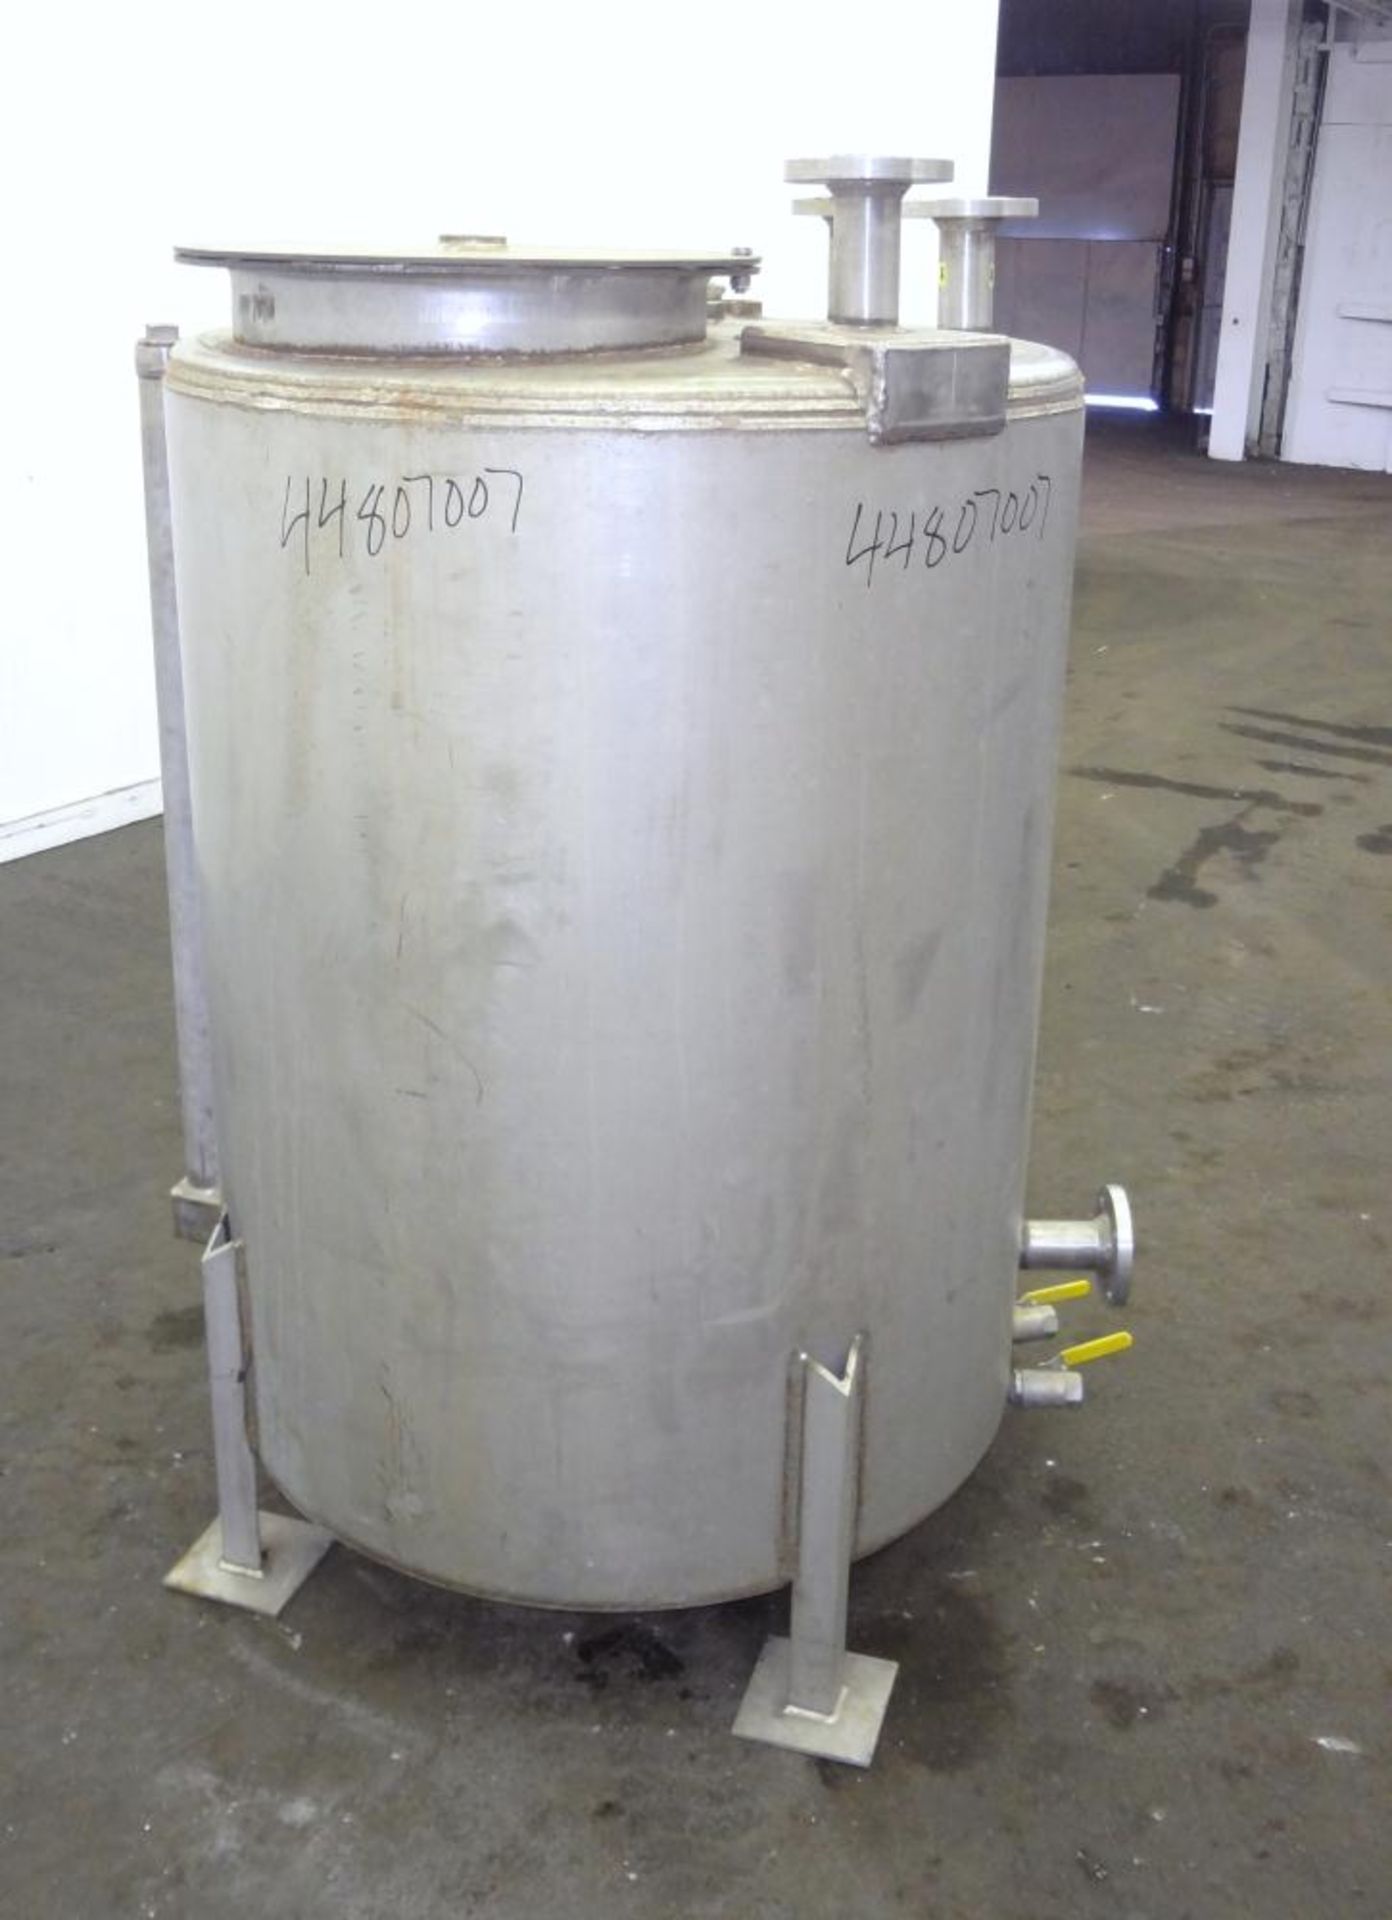 Kettle, 225 Gallon, 316 Stainless Steel, Vertical. Approximately 38" diameter x 49" straight side, - Image 5 of 9